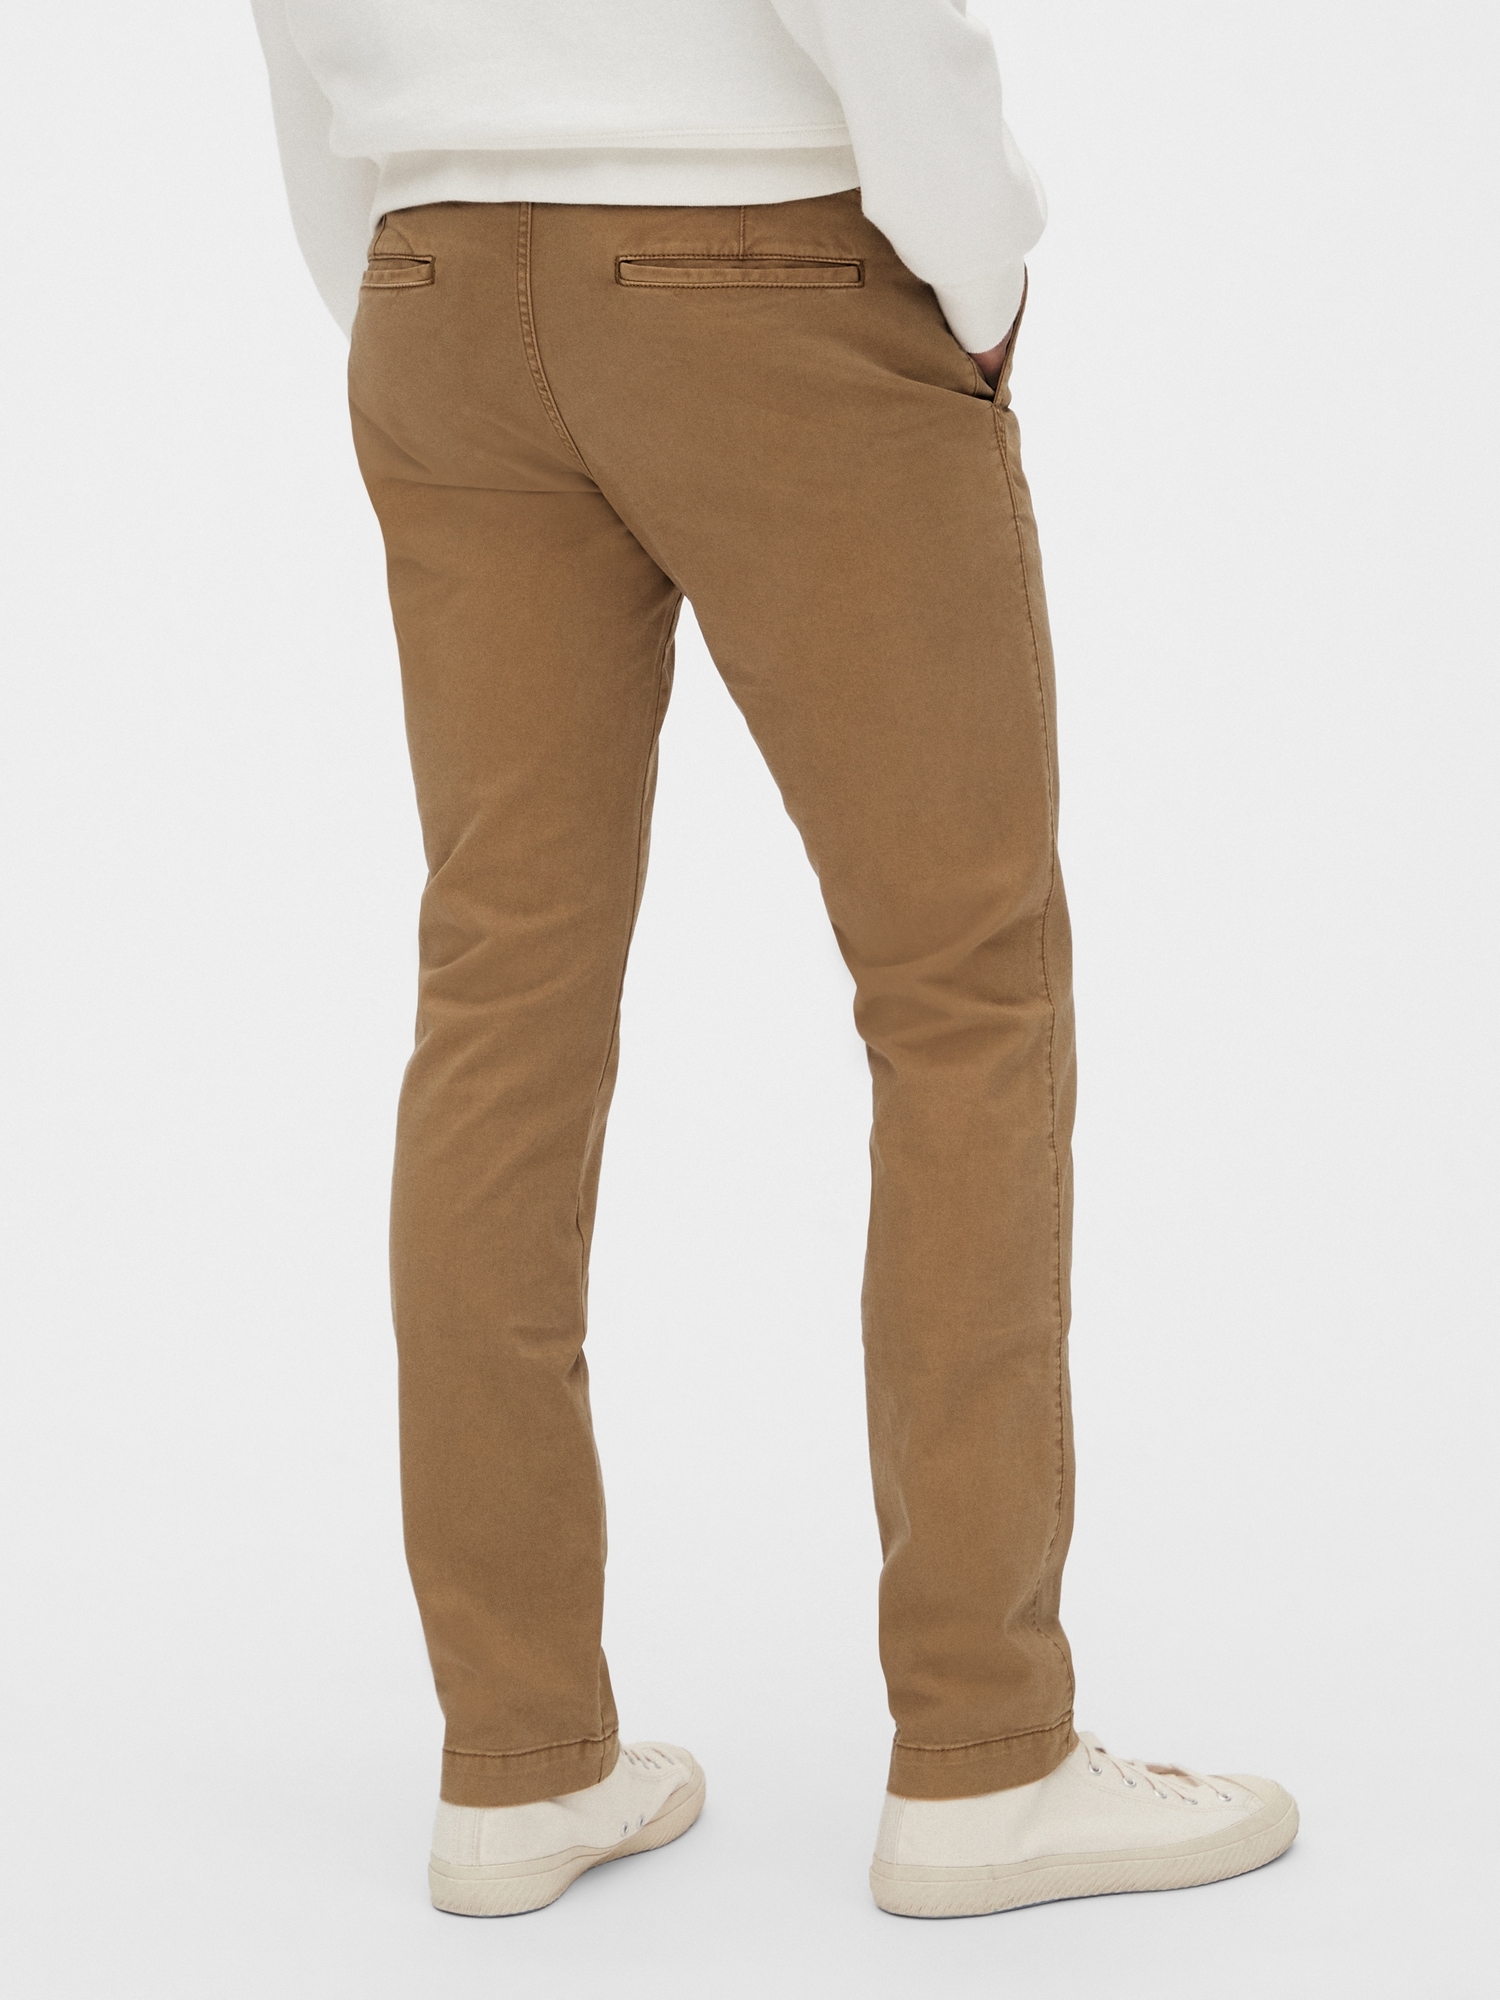 Vintage Khakis in Skinny Fit with 